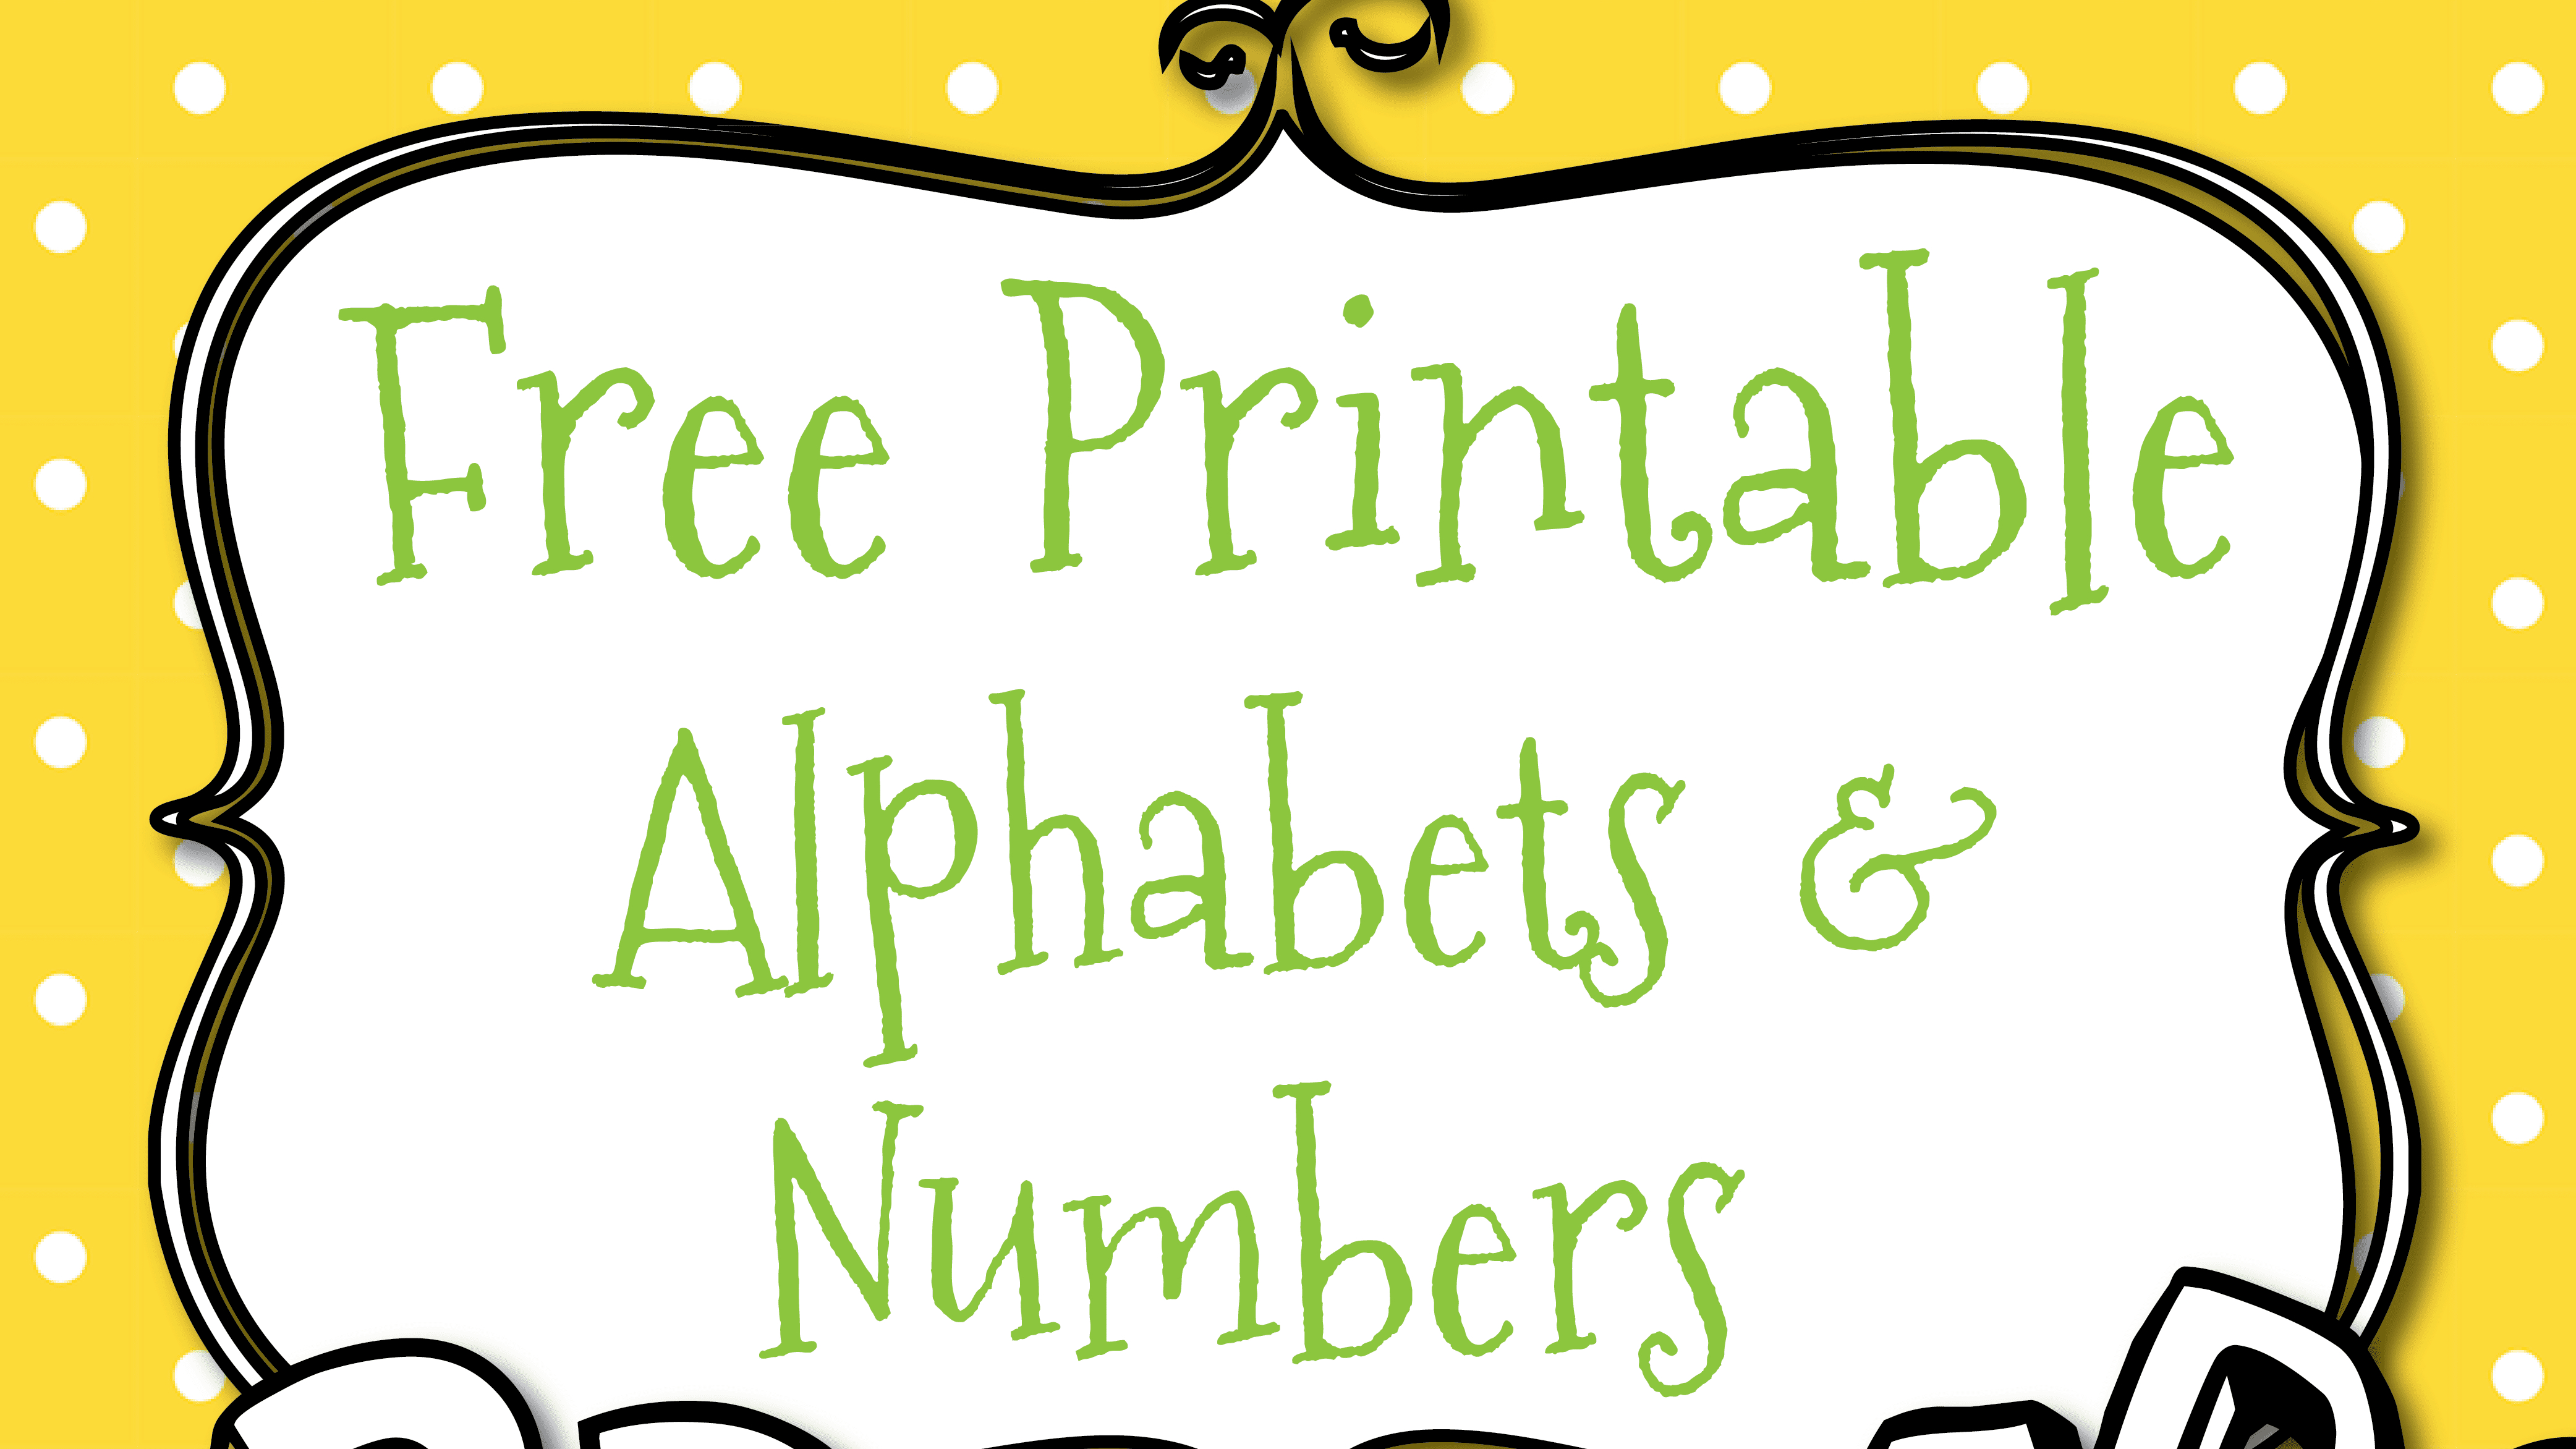 Free Printable Letters And Numbers For Crafts - Free Printable Block Letters